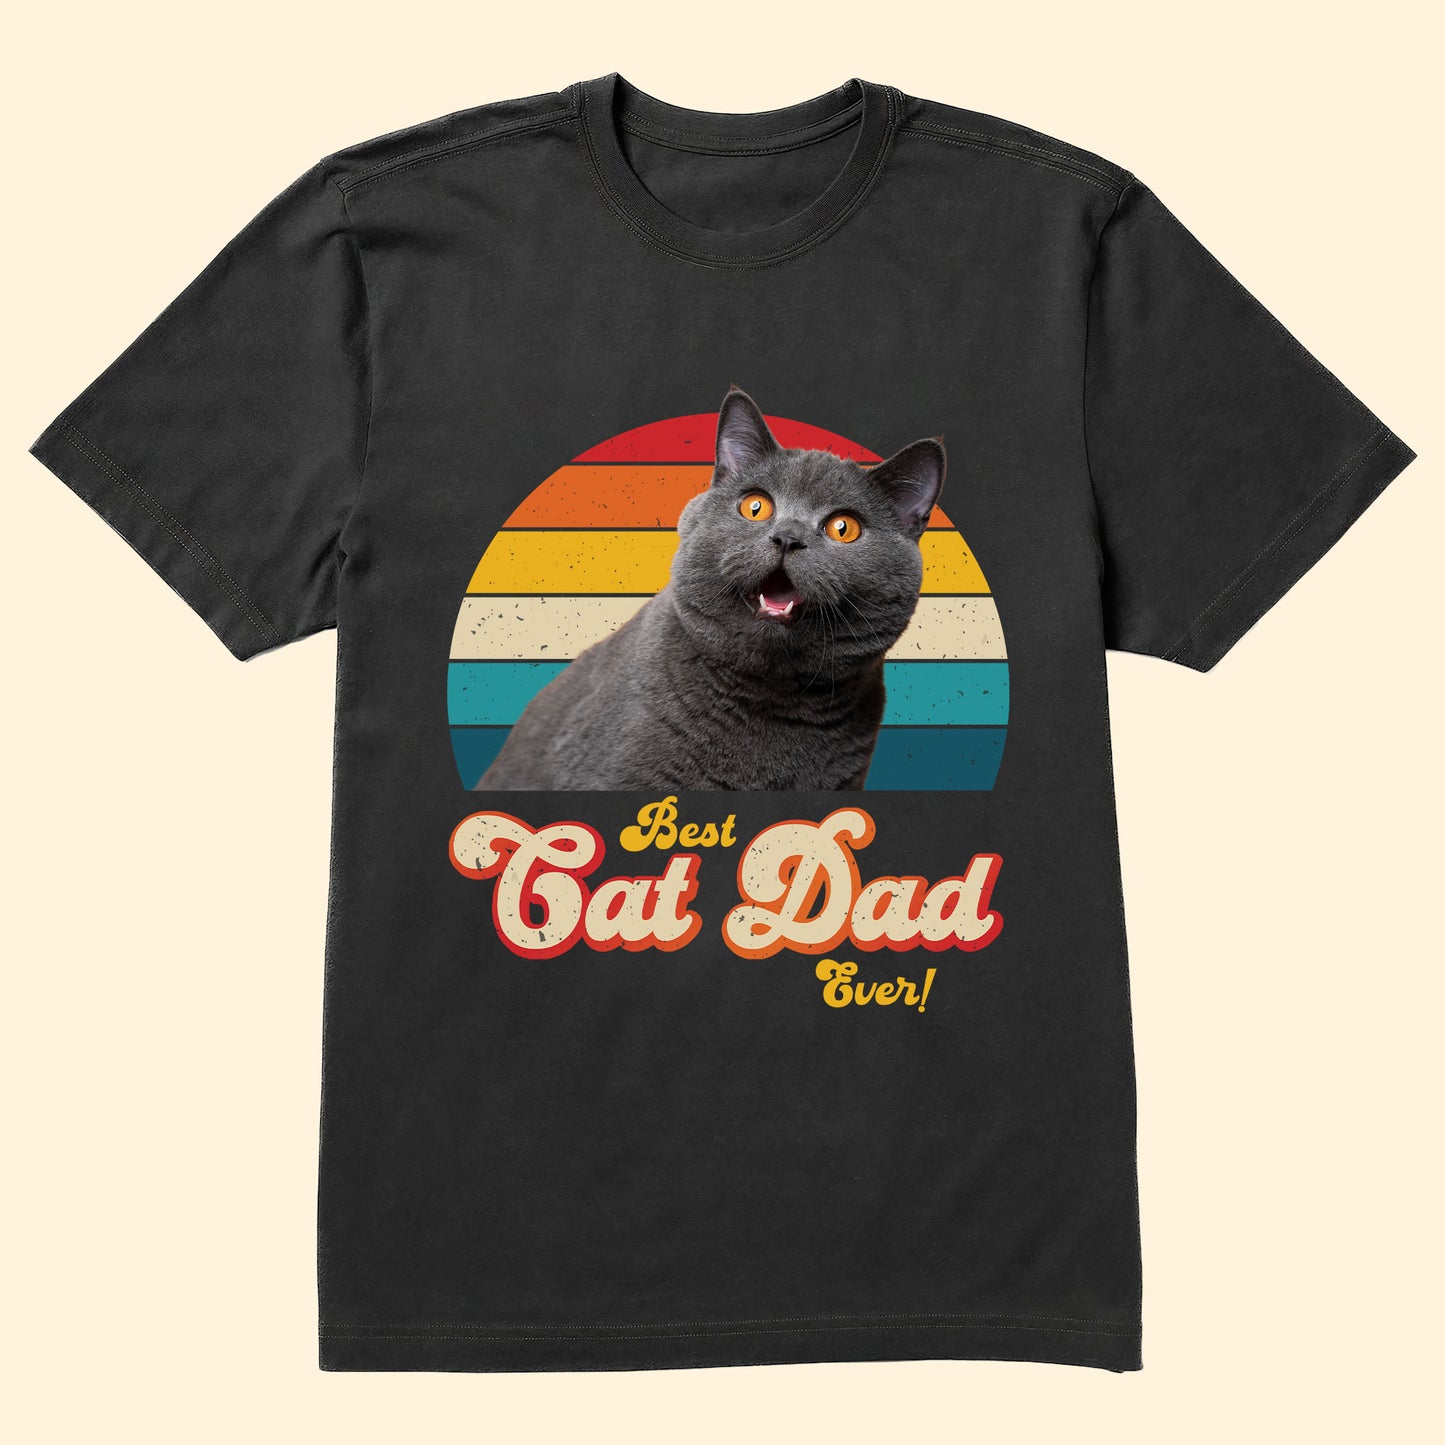 Best Cat Dad Ever - Personalized Photo Shirt